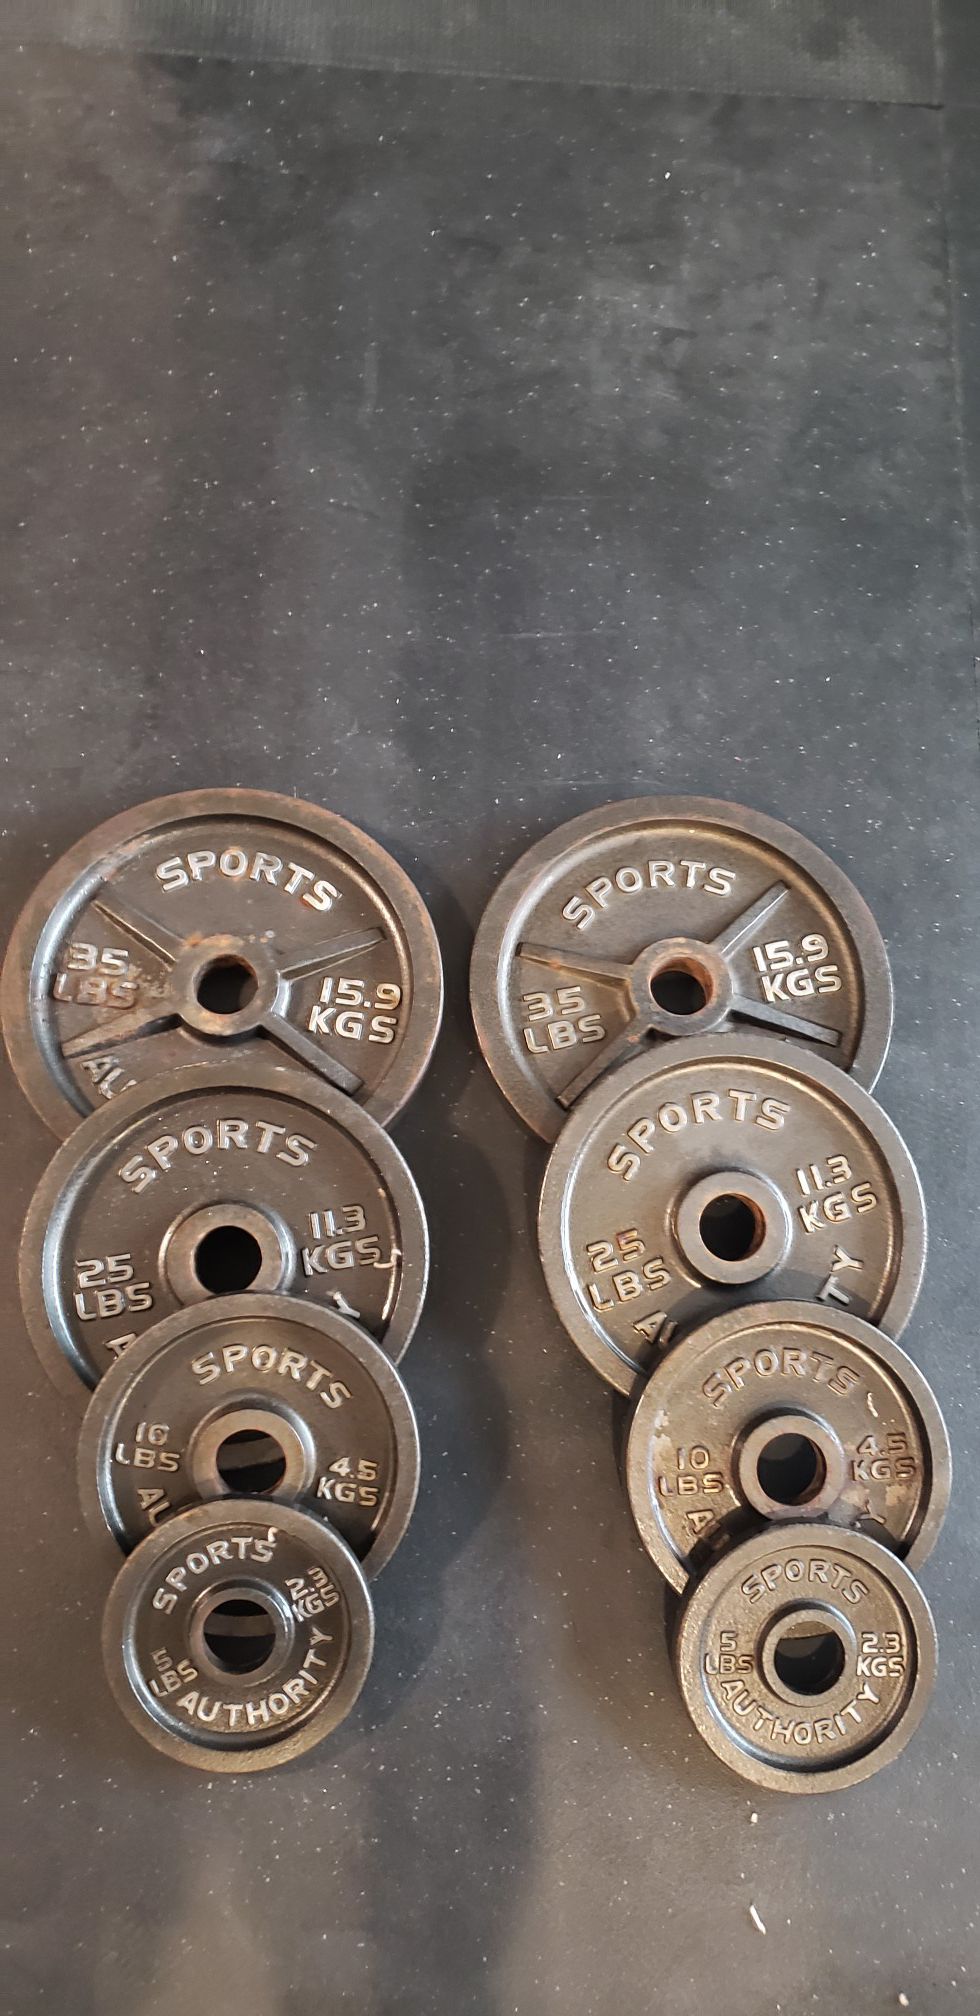 240 Lbs sports authority Weights